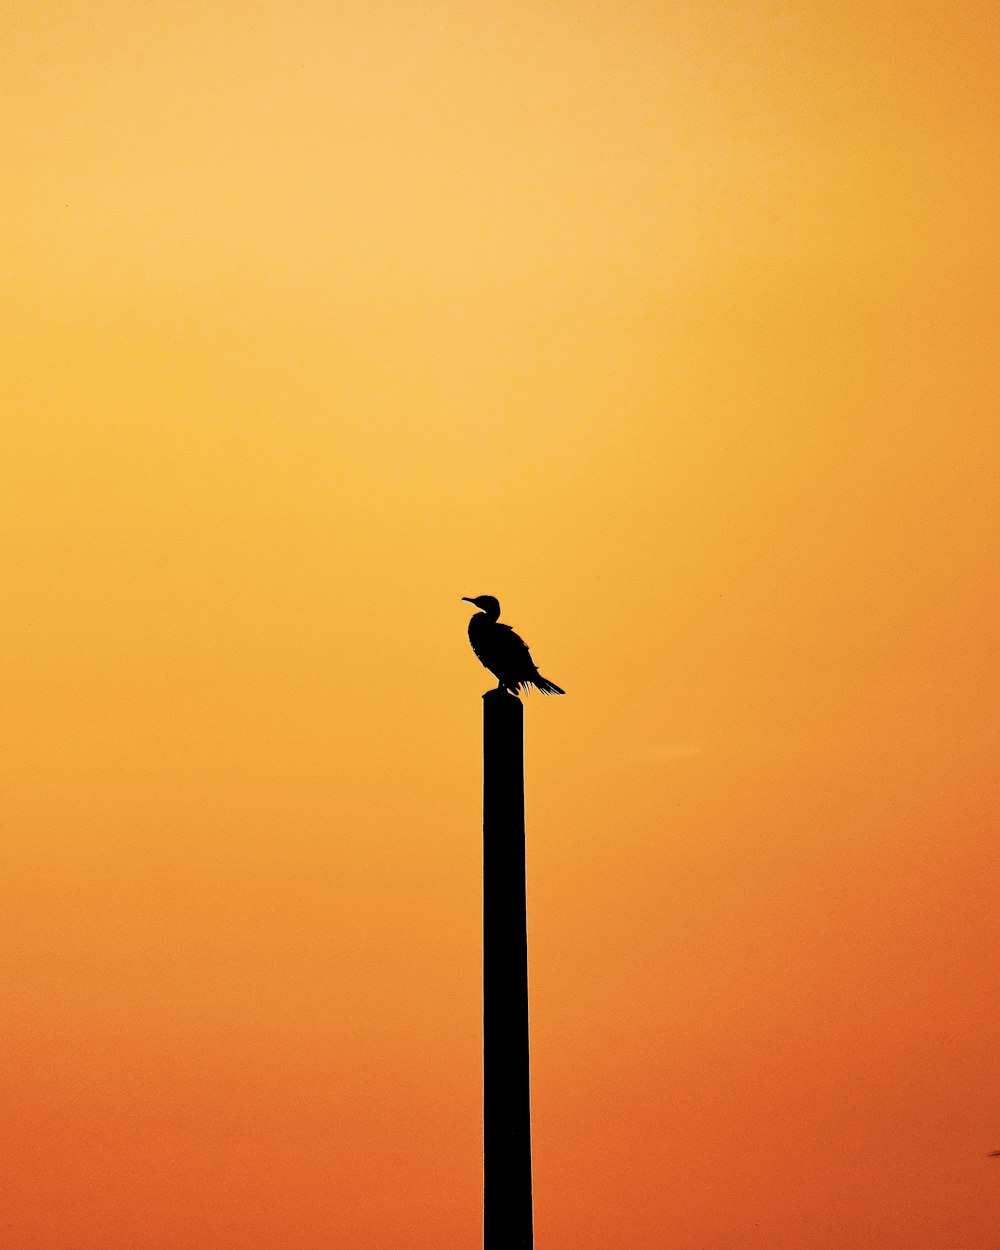 a bird sitting on top of a tall pole